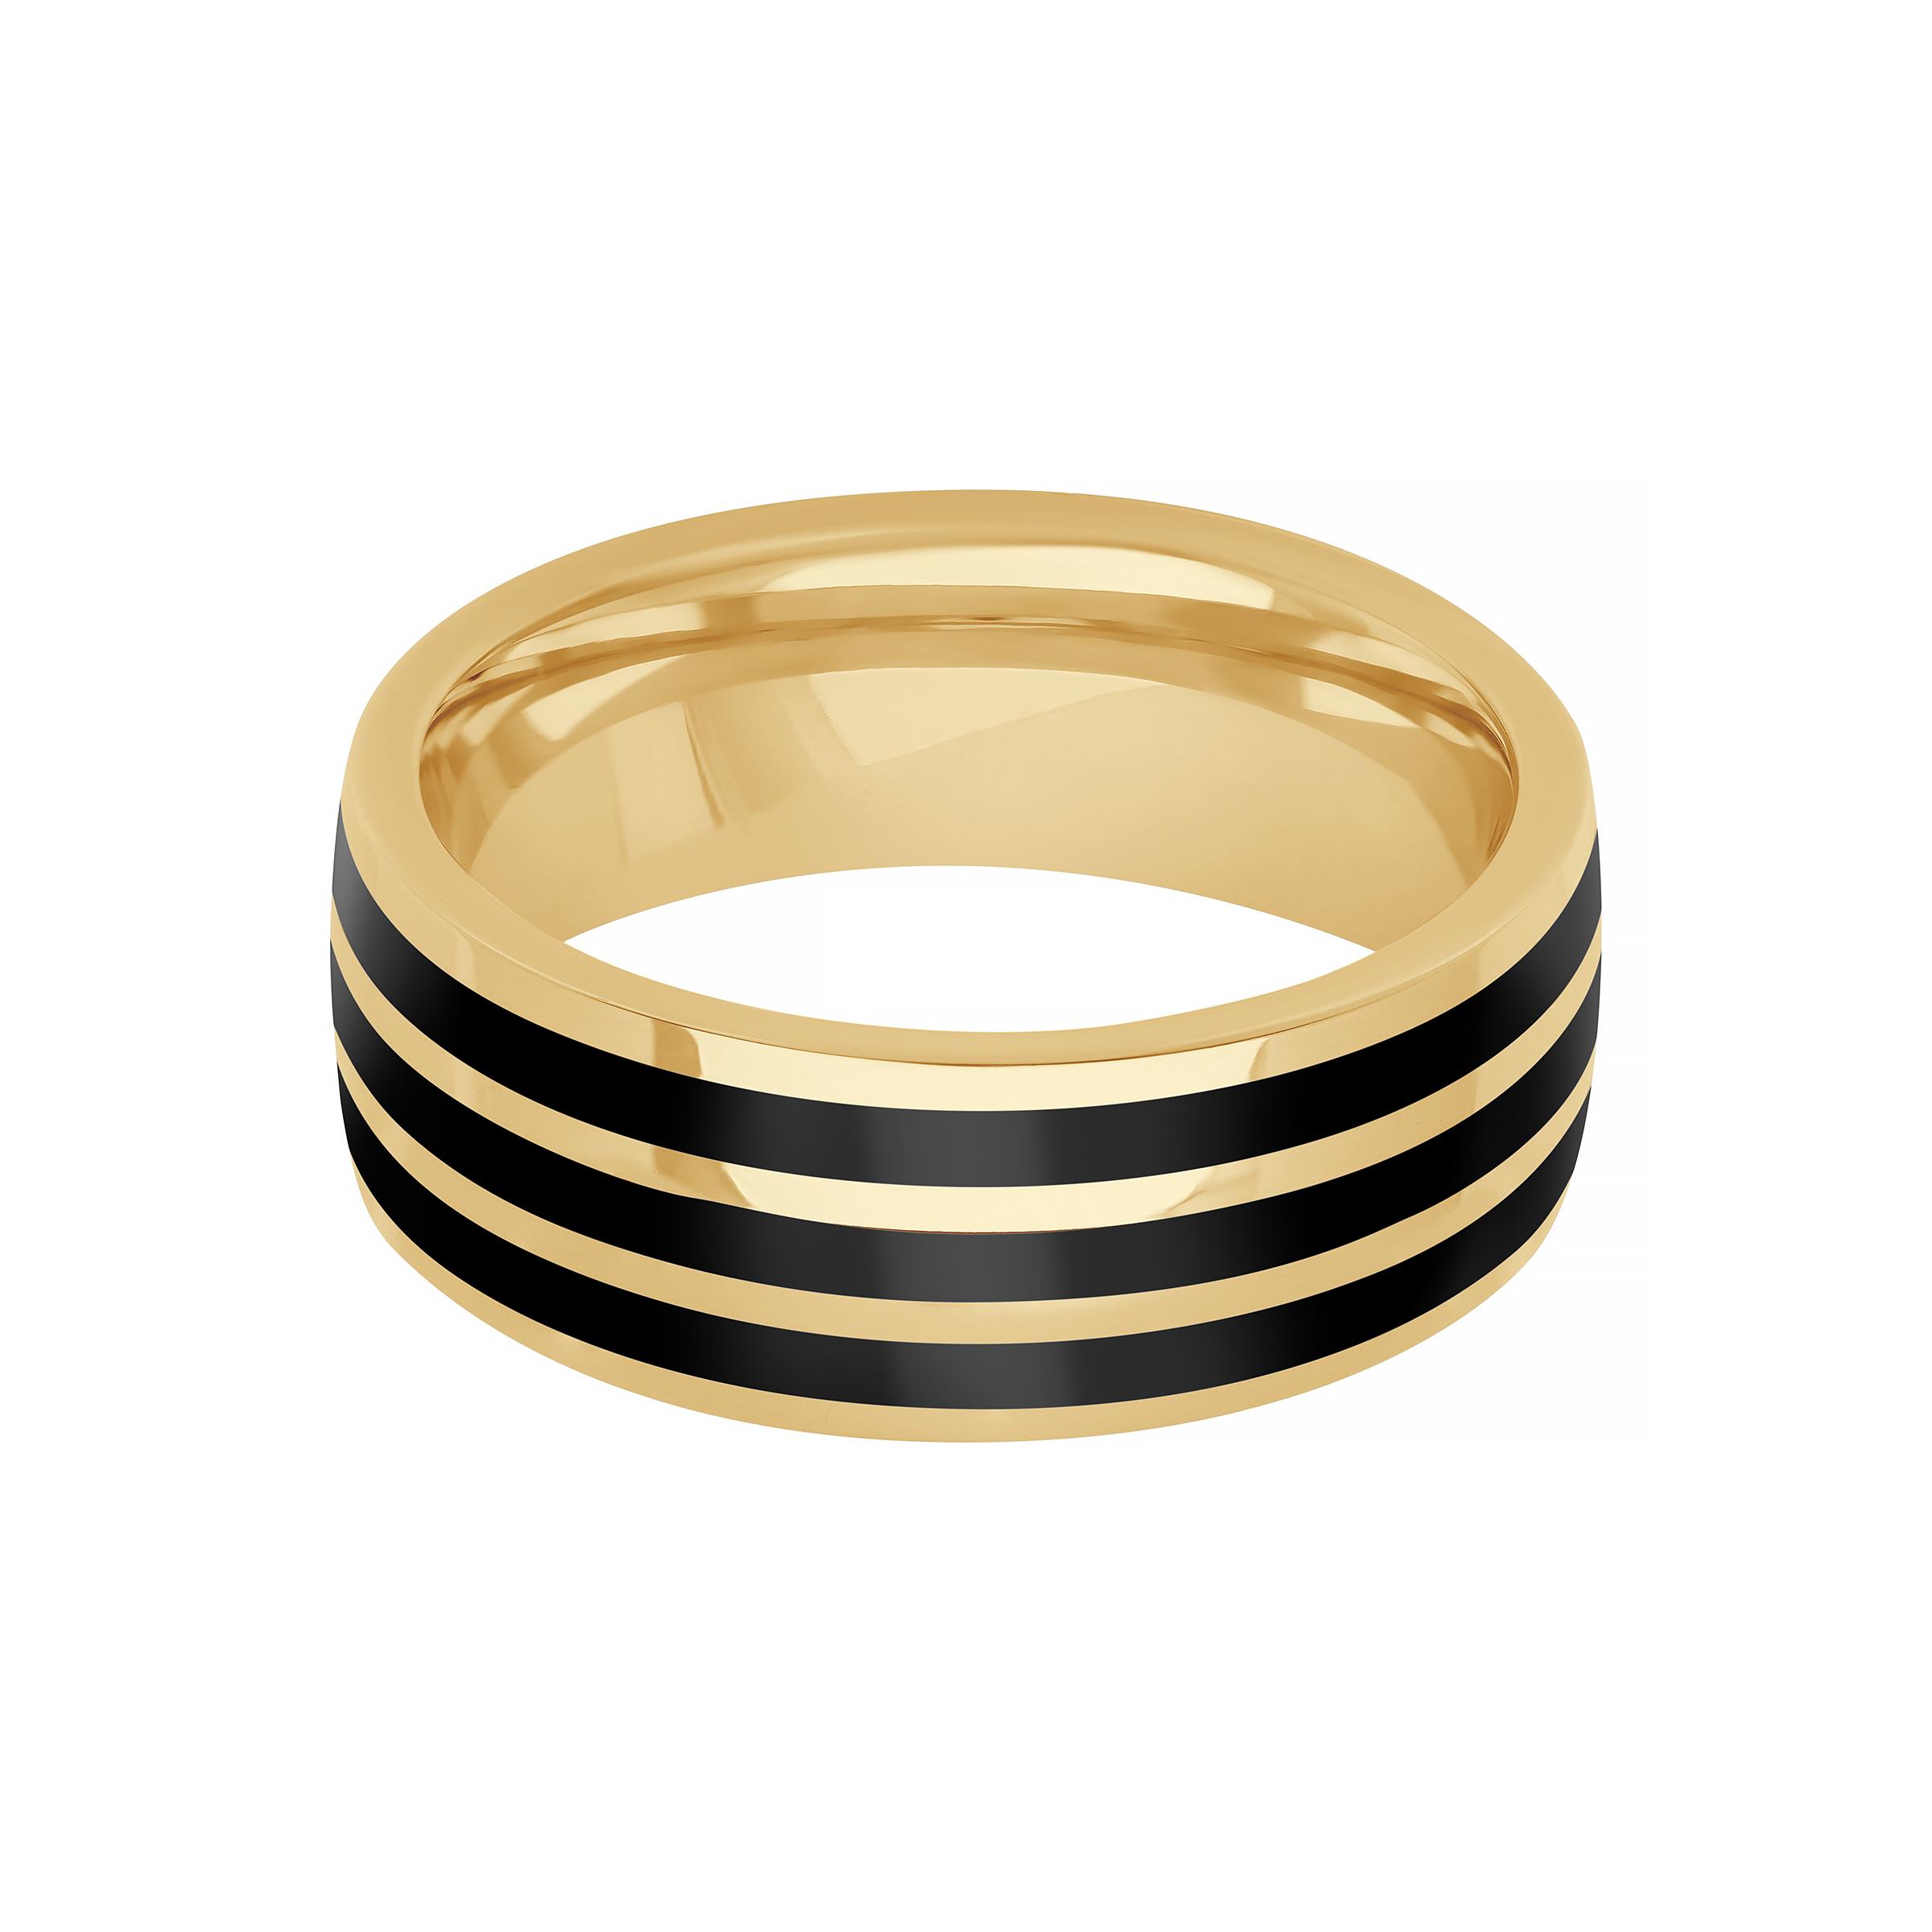 Gent's 14k Yellow Gold Band with Black Ceramic Stripes 0